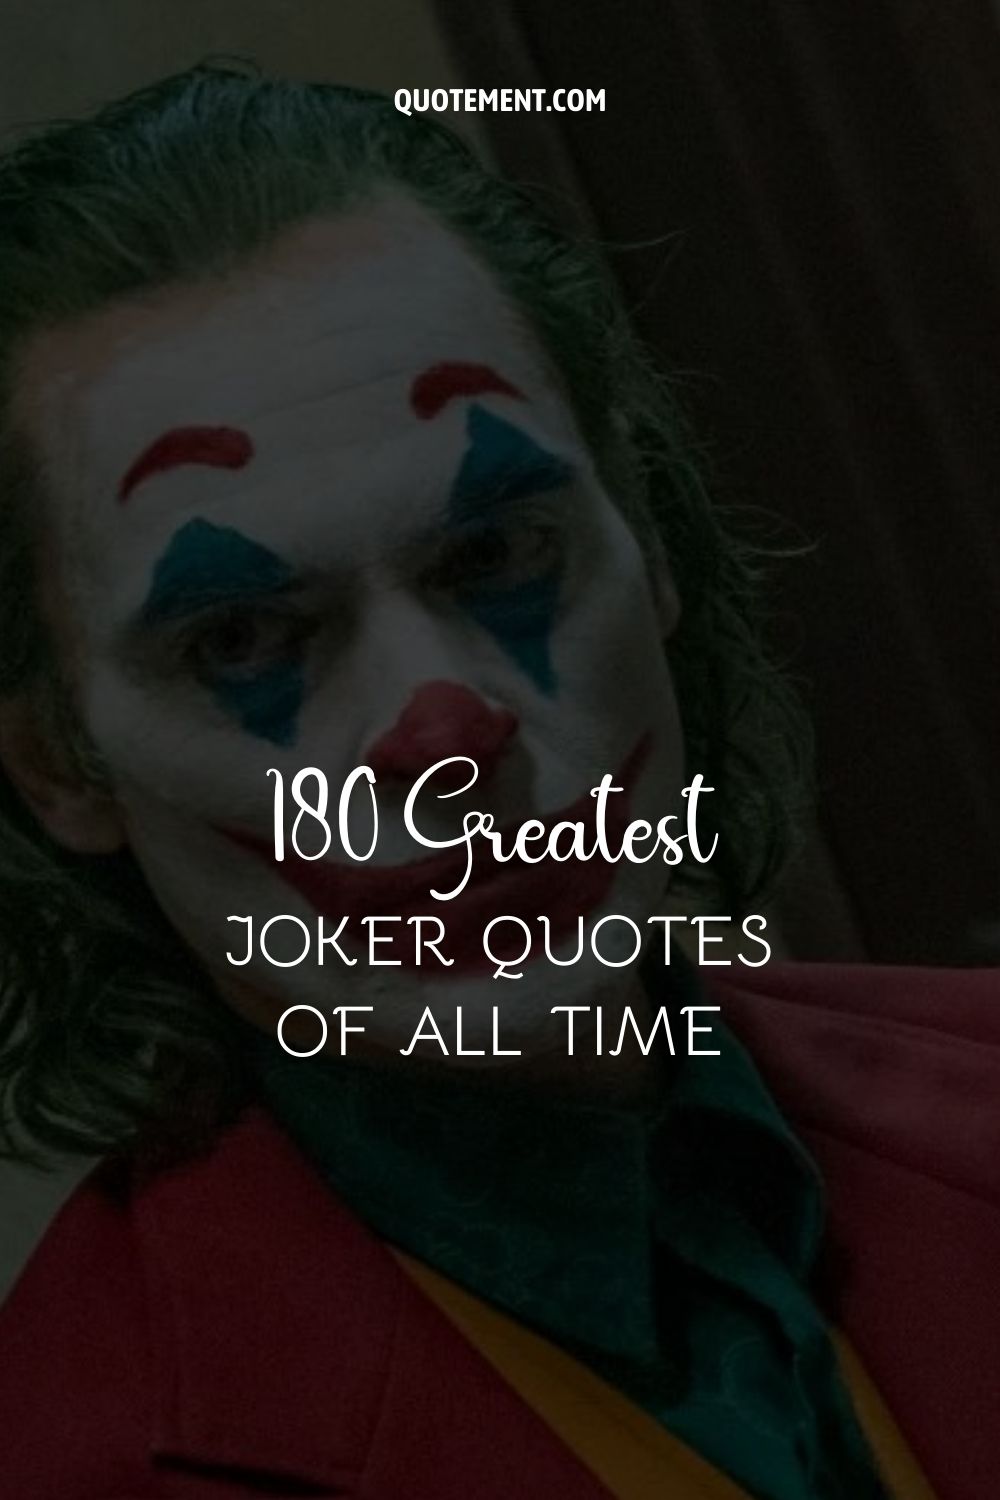 180 Greatest Joker Quotes Of All Time
